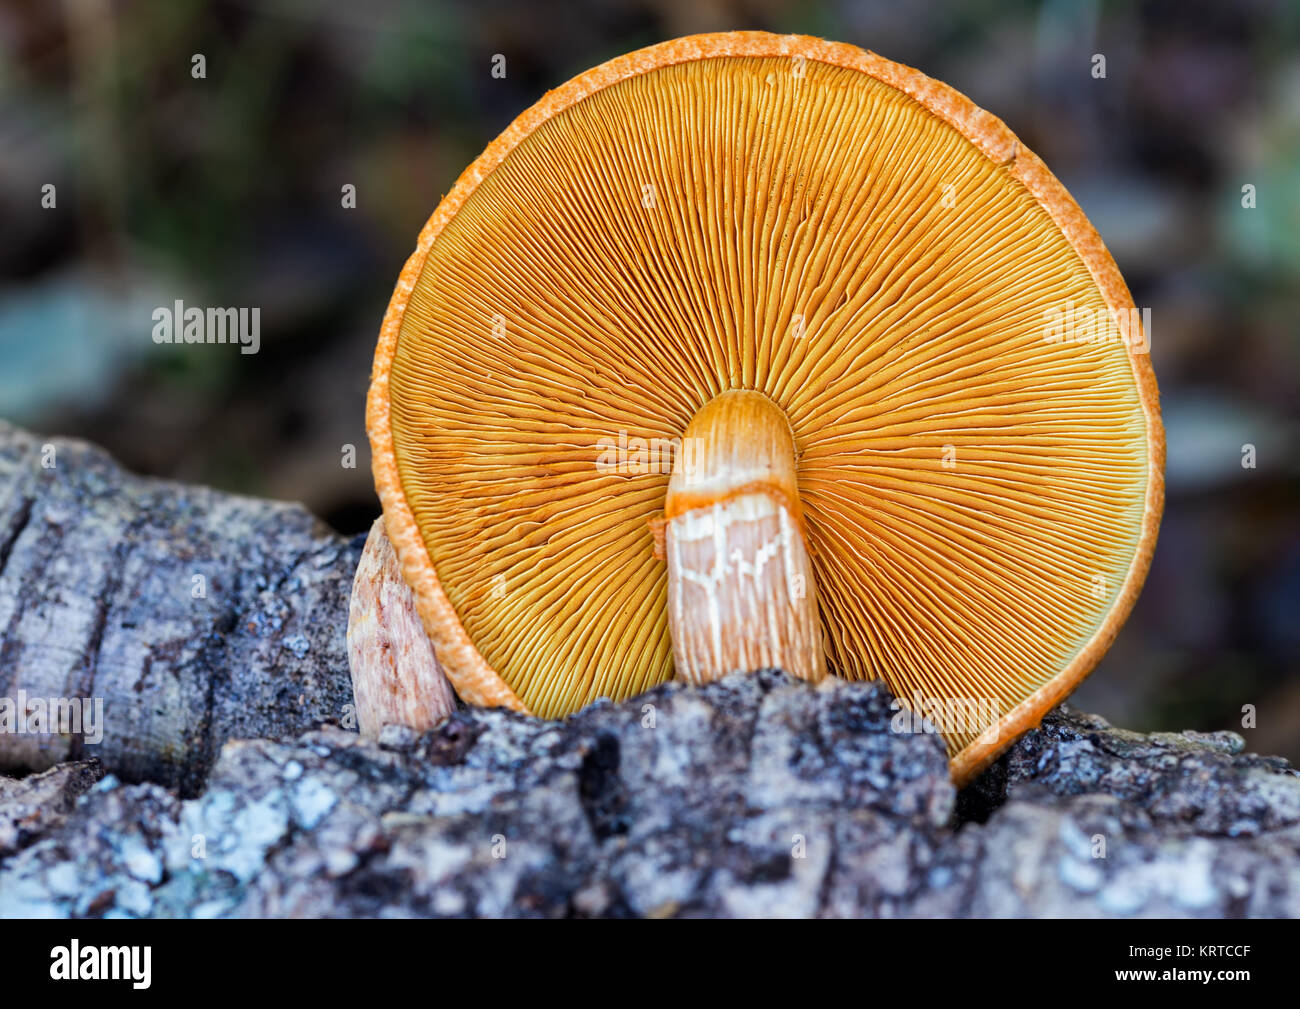 Detail of a mushroom growing on the old wood. Stock Photo